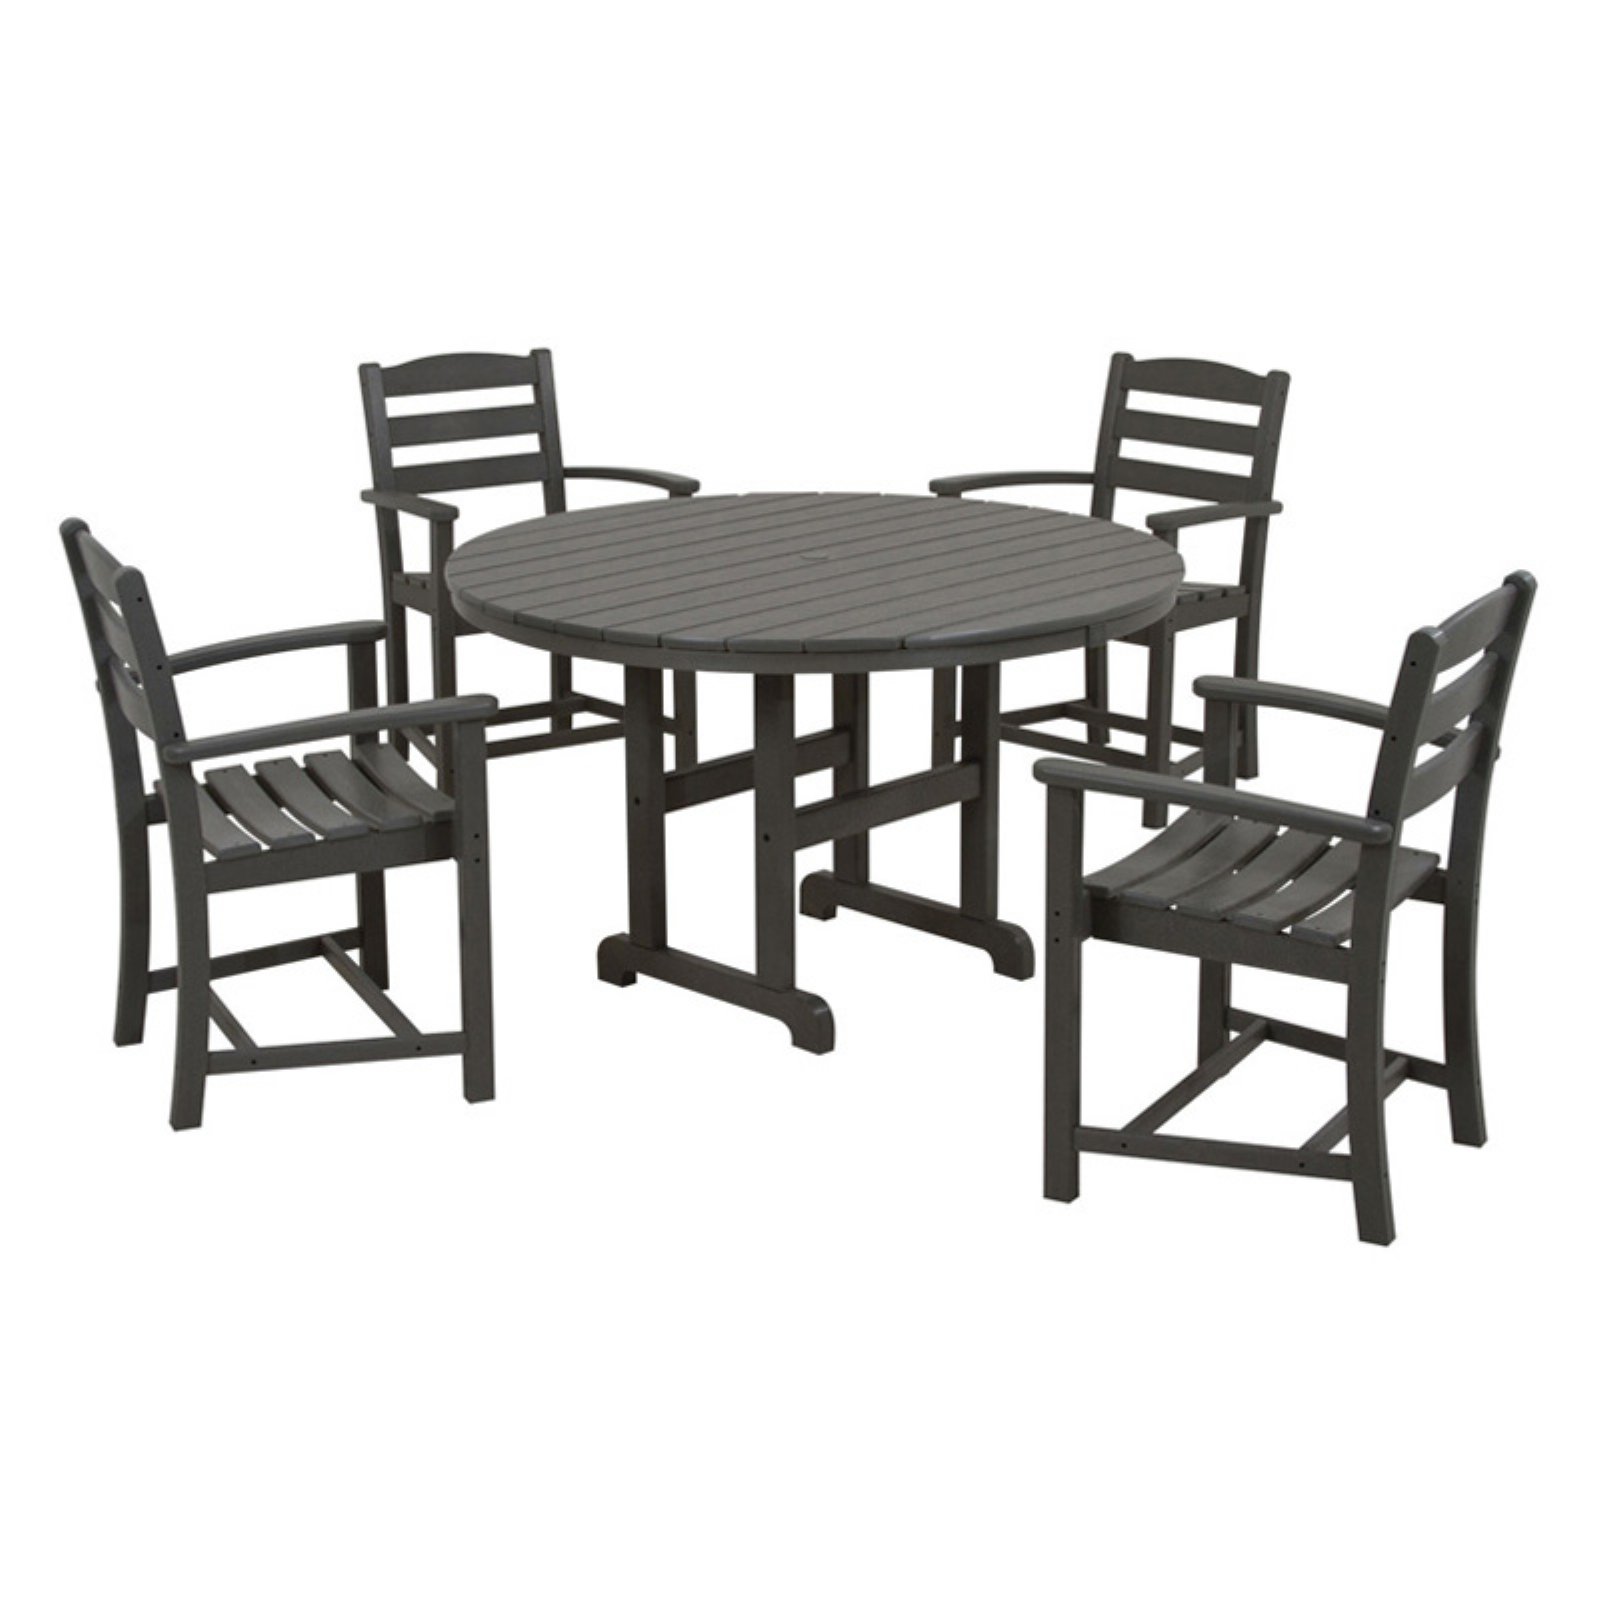 POLYWOOD La Casa Cafe 7-Piece Dining Set in White - image 3 of 4